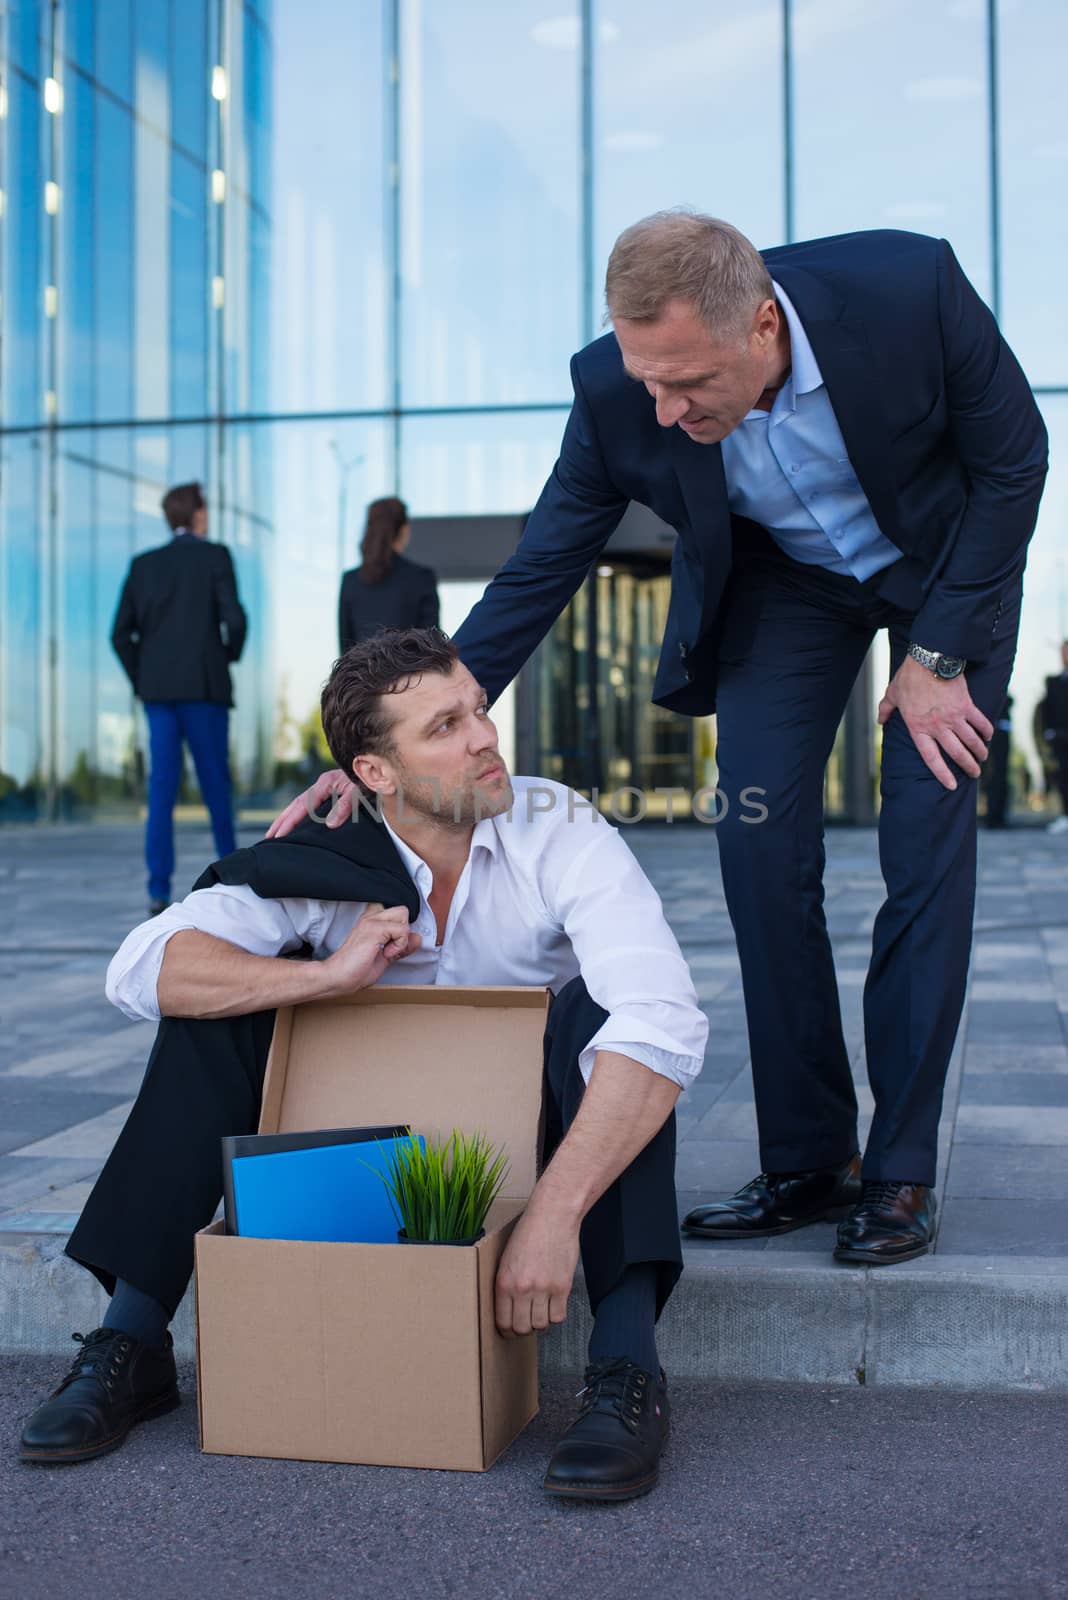 Fired business man sitting frustrated and upset on the street near office building with box of his belongings. He lost work. Other businessman comforts and encourages him